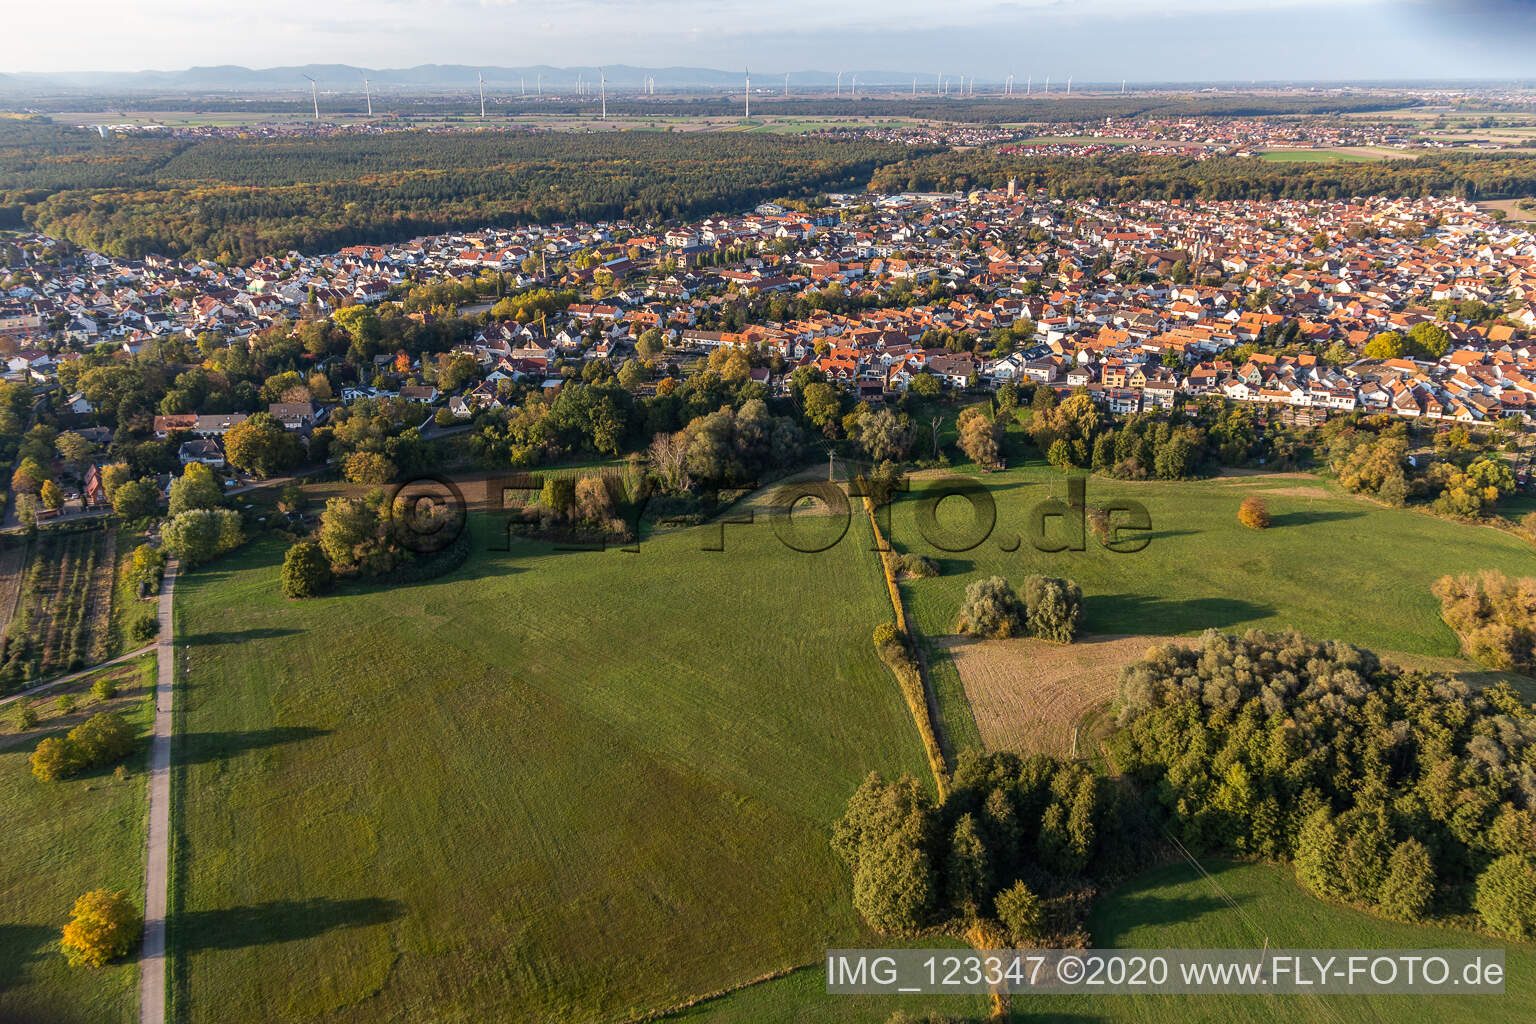 Aerial photograpy of Park on Ziegelbergstrasse in Jockgrim in the state Rhineland-Palatinate, Germany